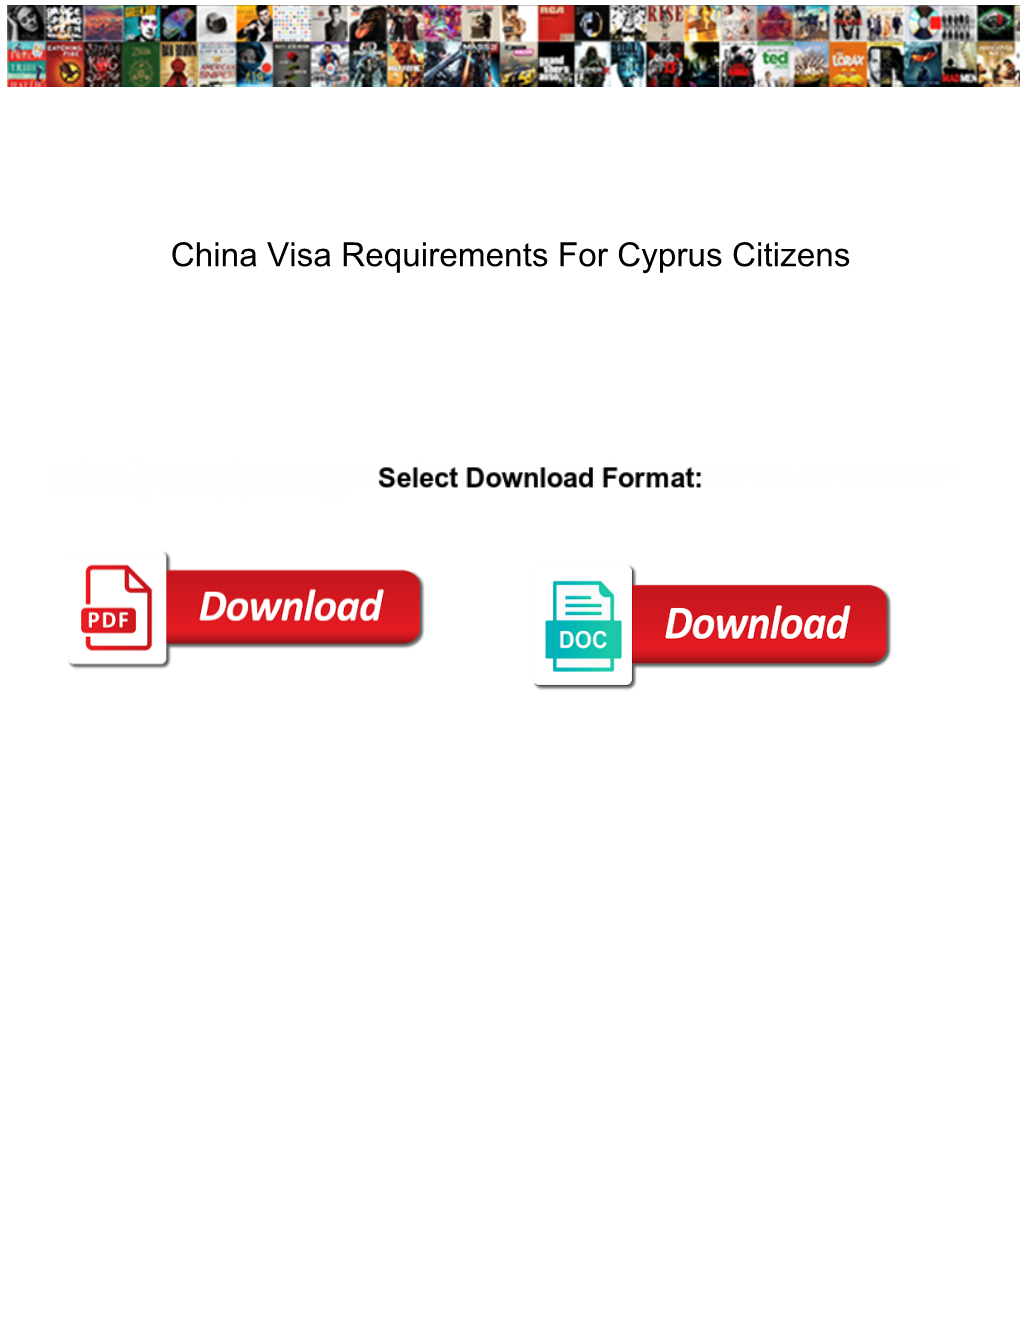 China Visa Requirements for Cyprus Citizens